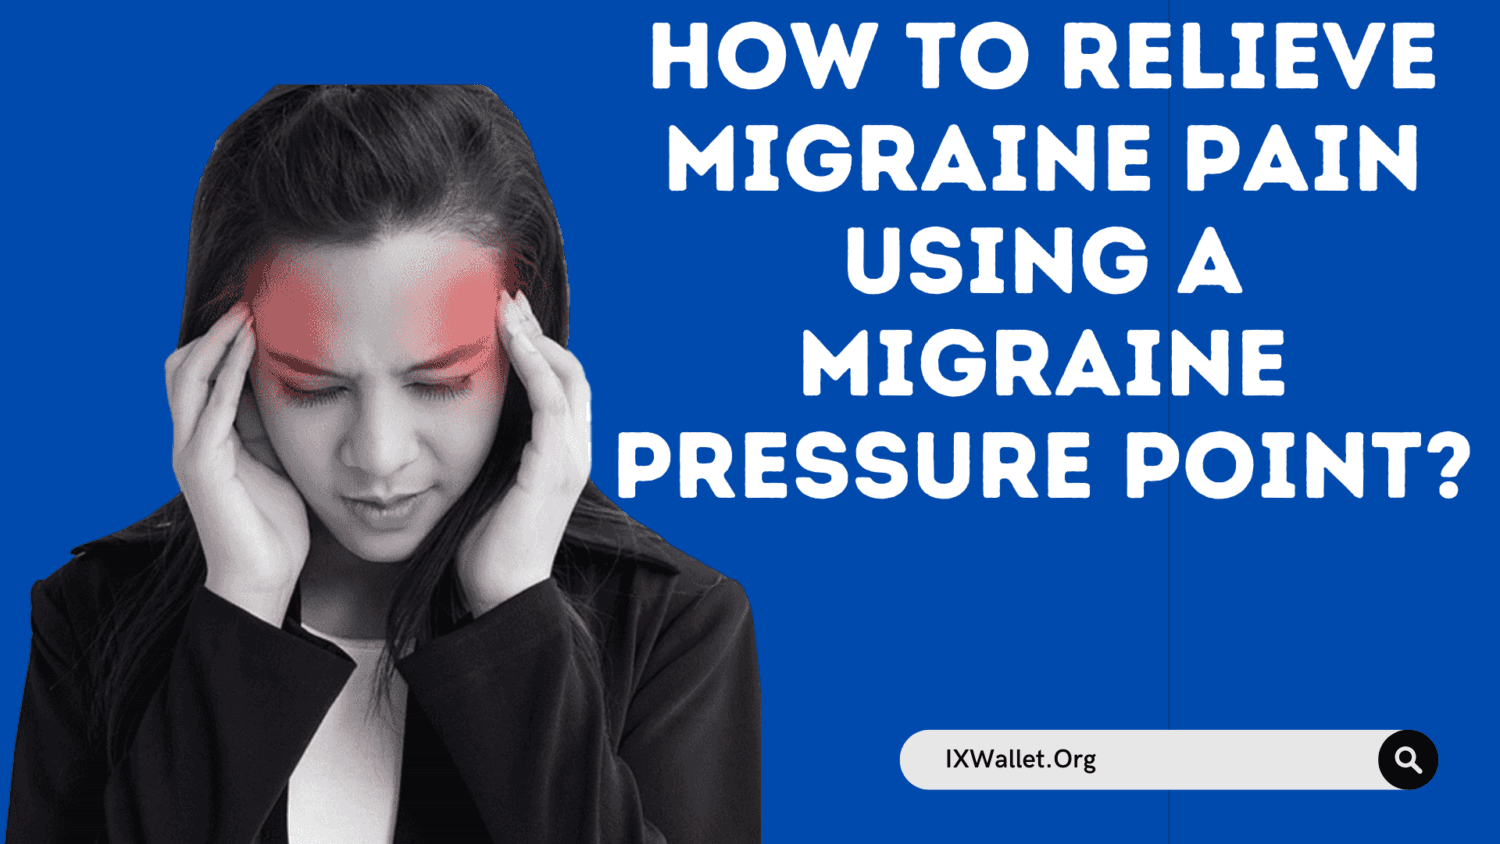 How to Relieve Migraine Pain Using a Migraine Pressure Point?